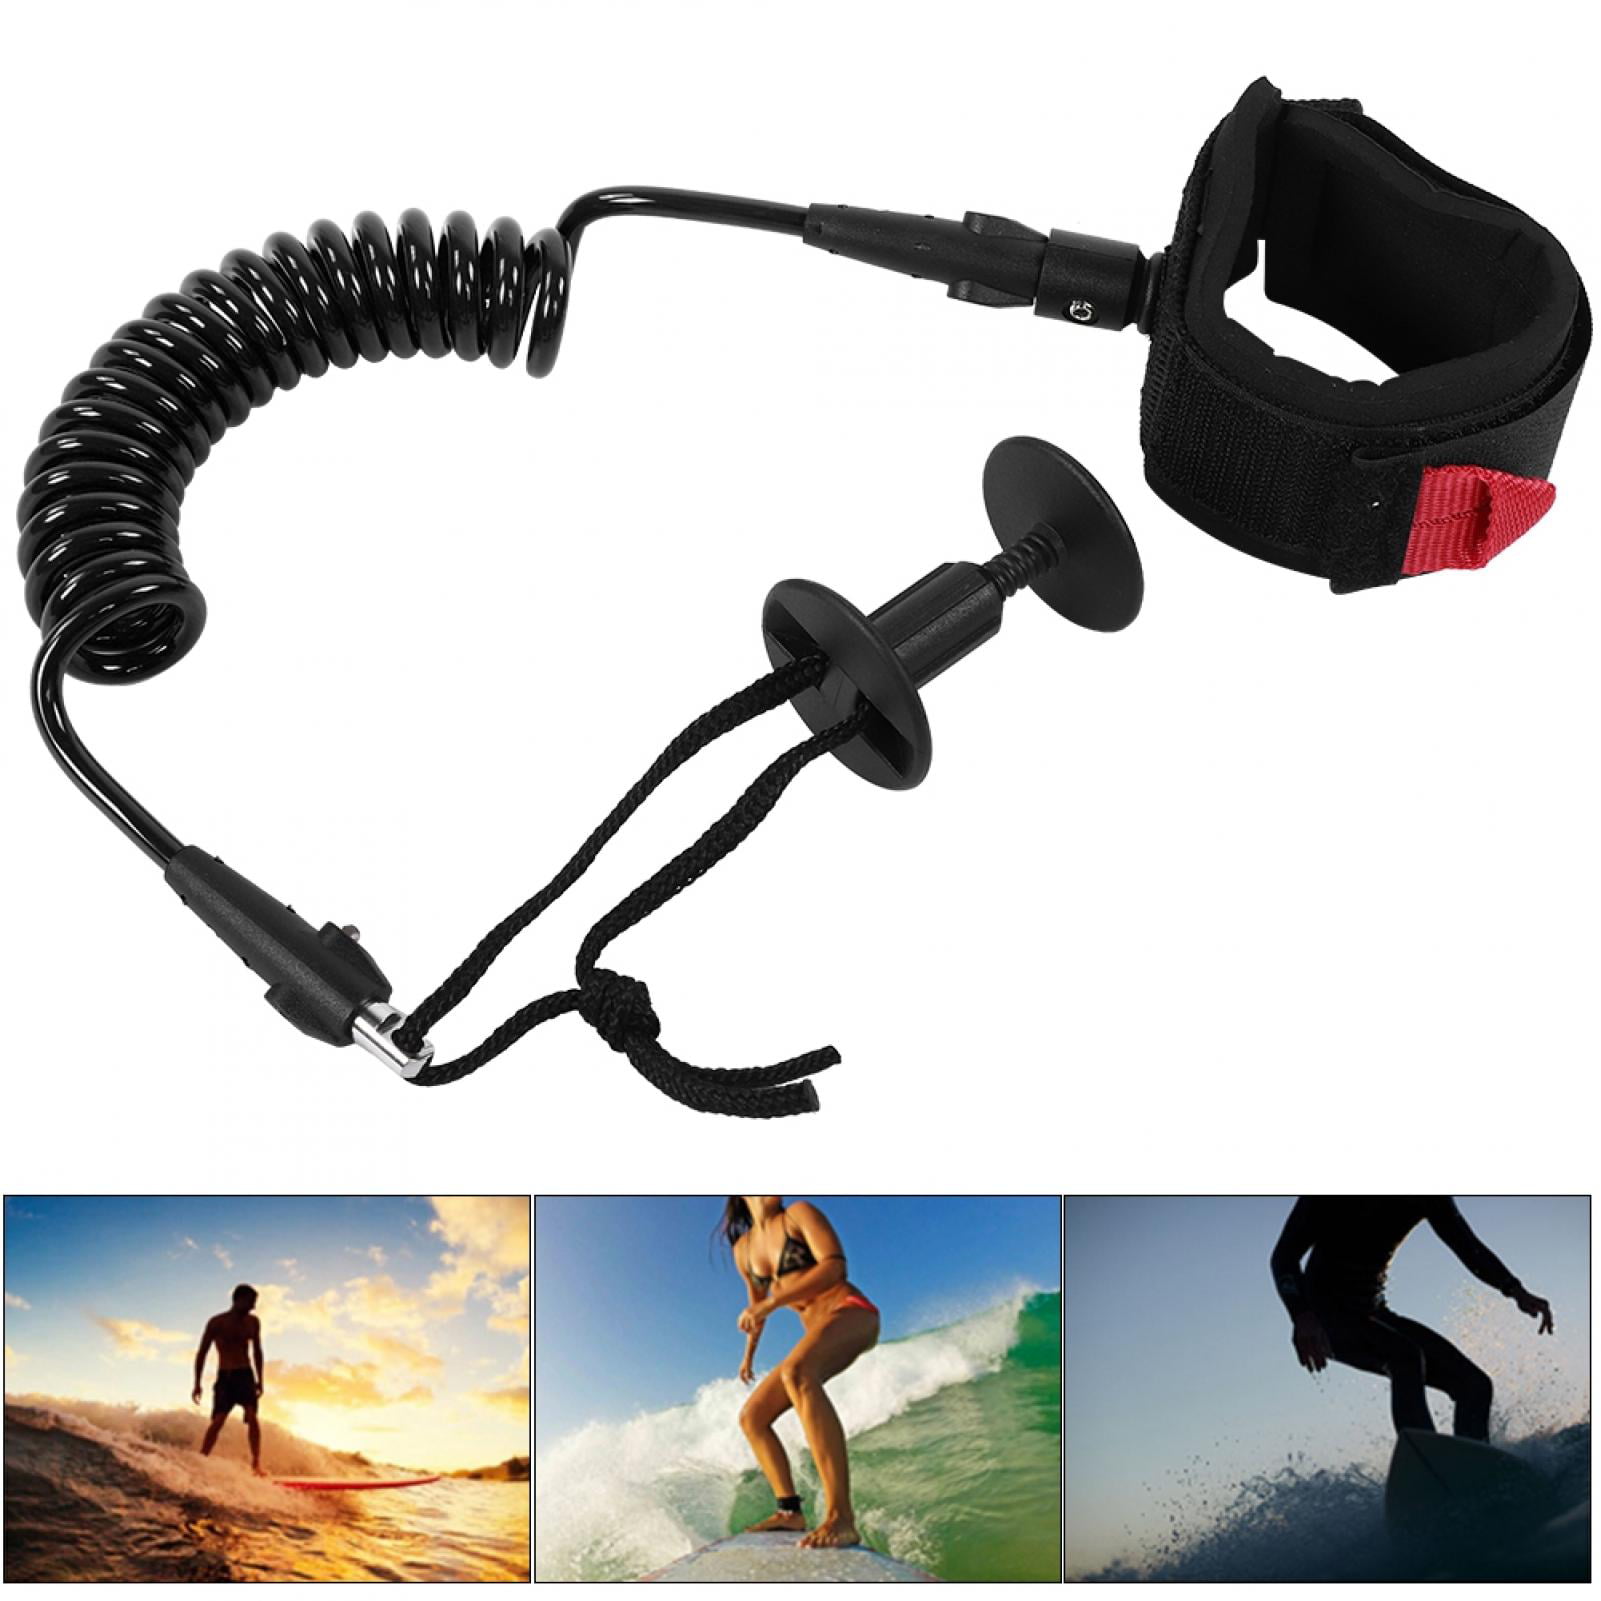 Details about   Surfing Bodyboard Coiled Wrist Leash Board Surfing Accessories 5.5MM/5ft S 